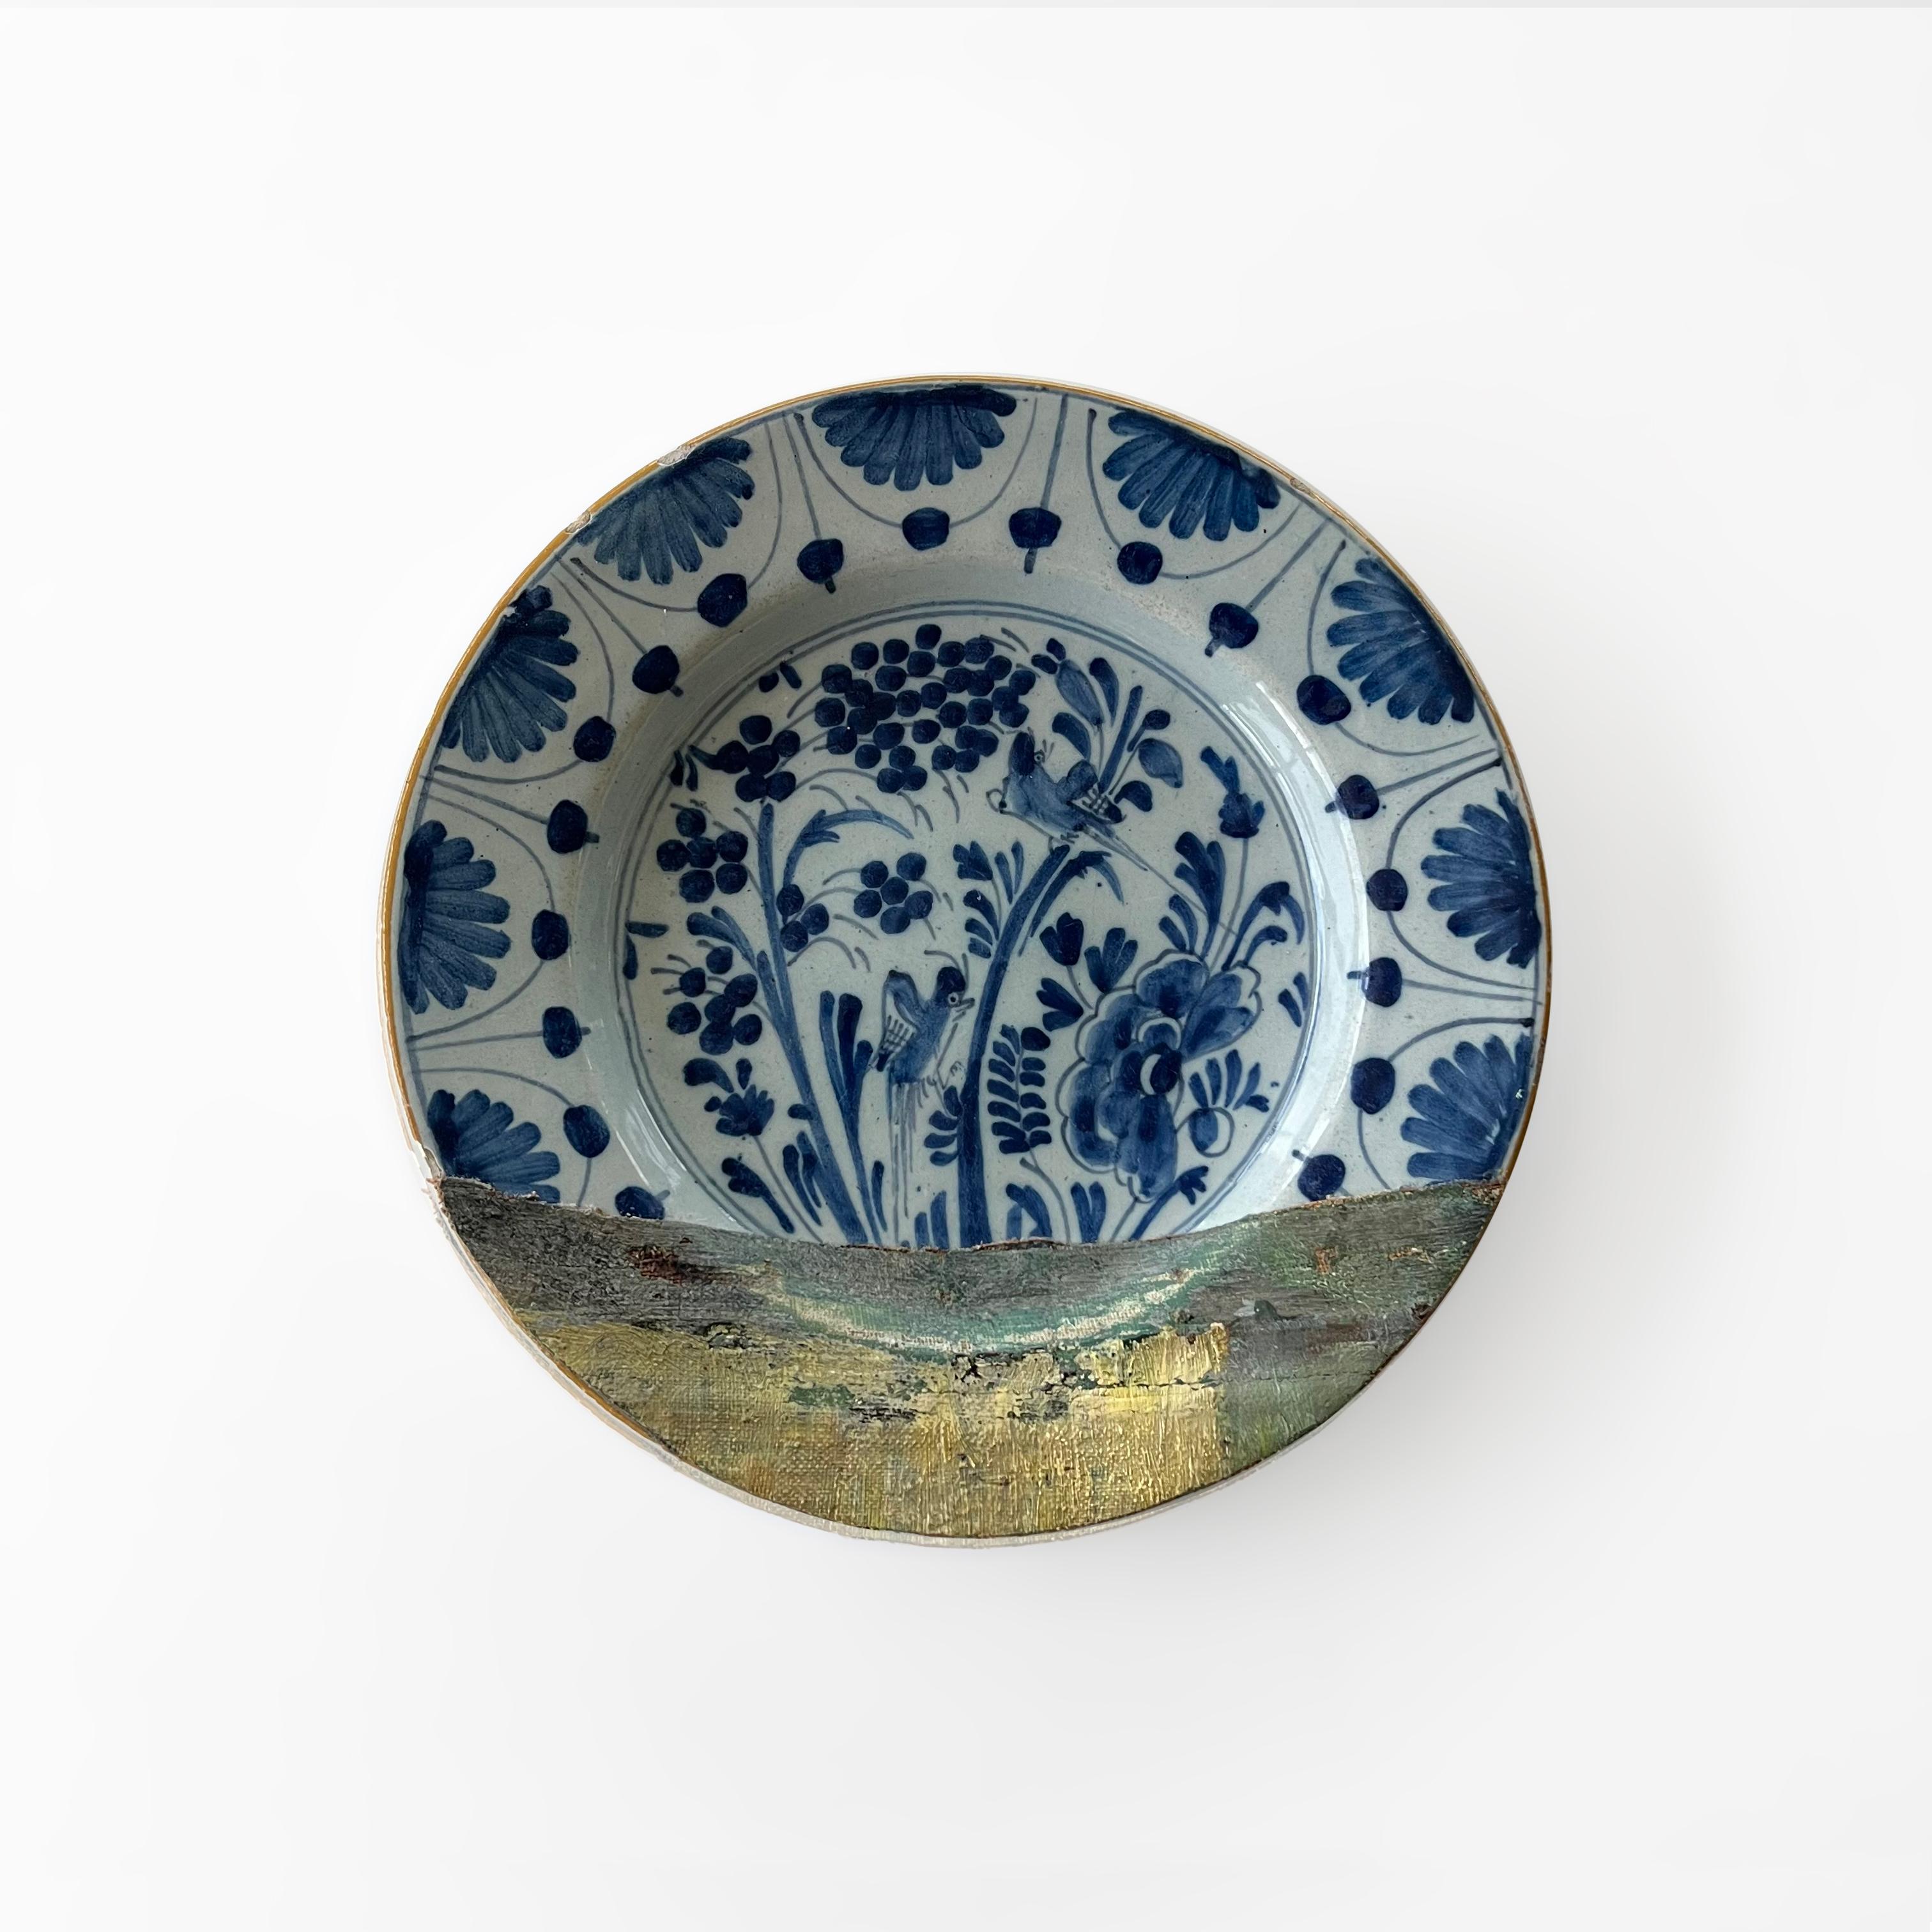 “The White Vase” belongs to our “Altered Perspectives” series: assemblages of ceramic plates layered with a painting on canvas.
This artwork includes 2 antique Delfts Blue plates from the 18th C. and one hand painted saucer from the Royal Tichelaar